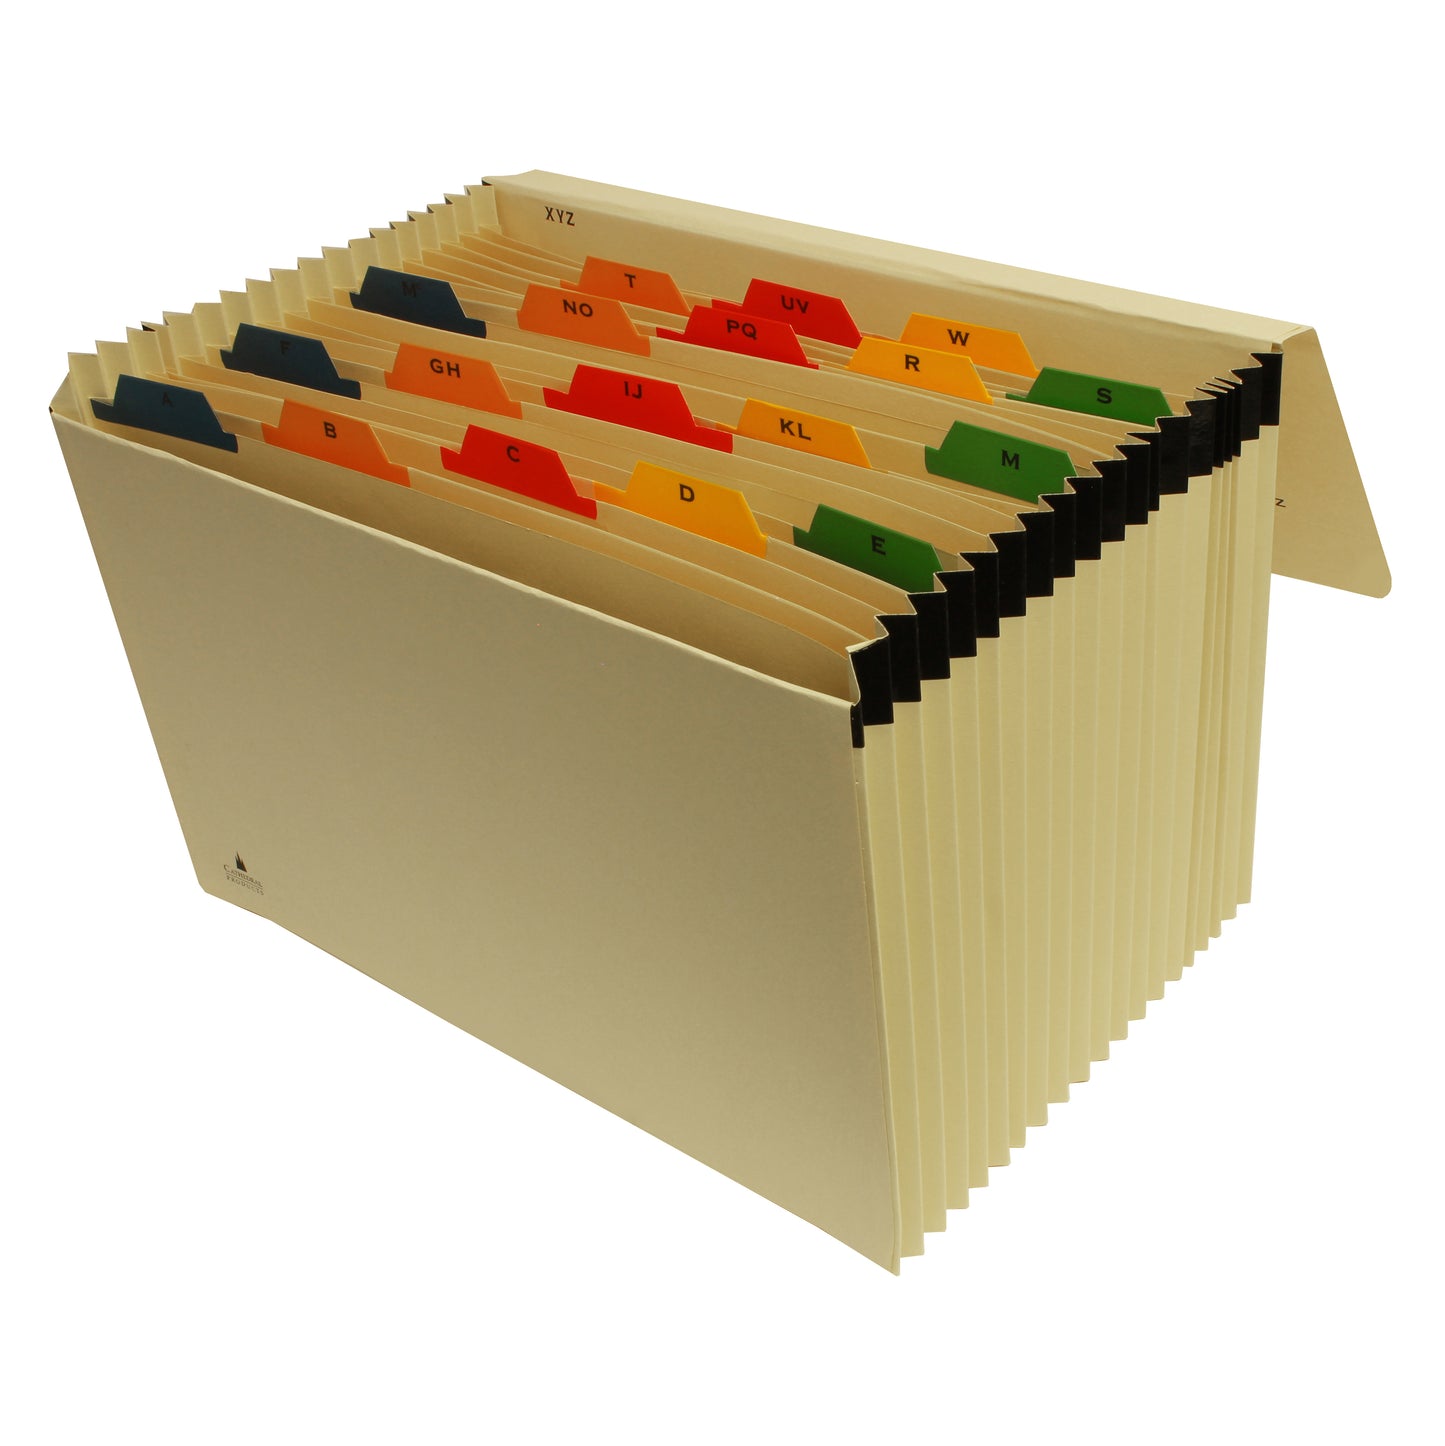 A side view of an expanded beige file organizer with multi-colored tabs indicating the letters of the alphabet for sorting documents. Each section has a tab in a different color with a letter or letter group written on it, such as 'A', 'GH', 'IJ', and so on, up to 'XYZ'. The file appears to have a large capacity with numerous sections visible, making it a practical tool for organizing a wide range of documents.